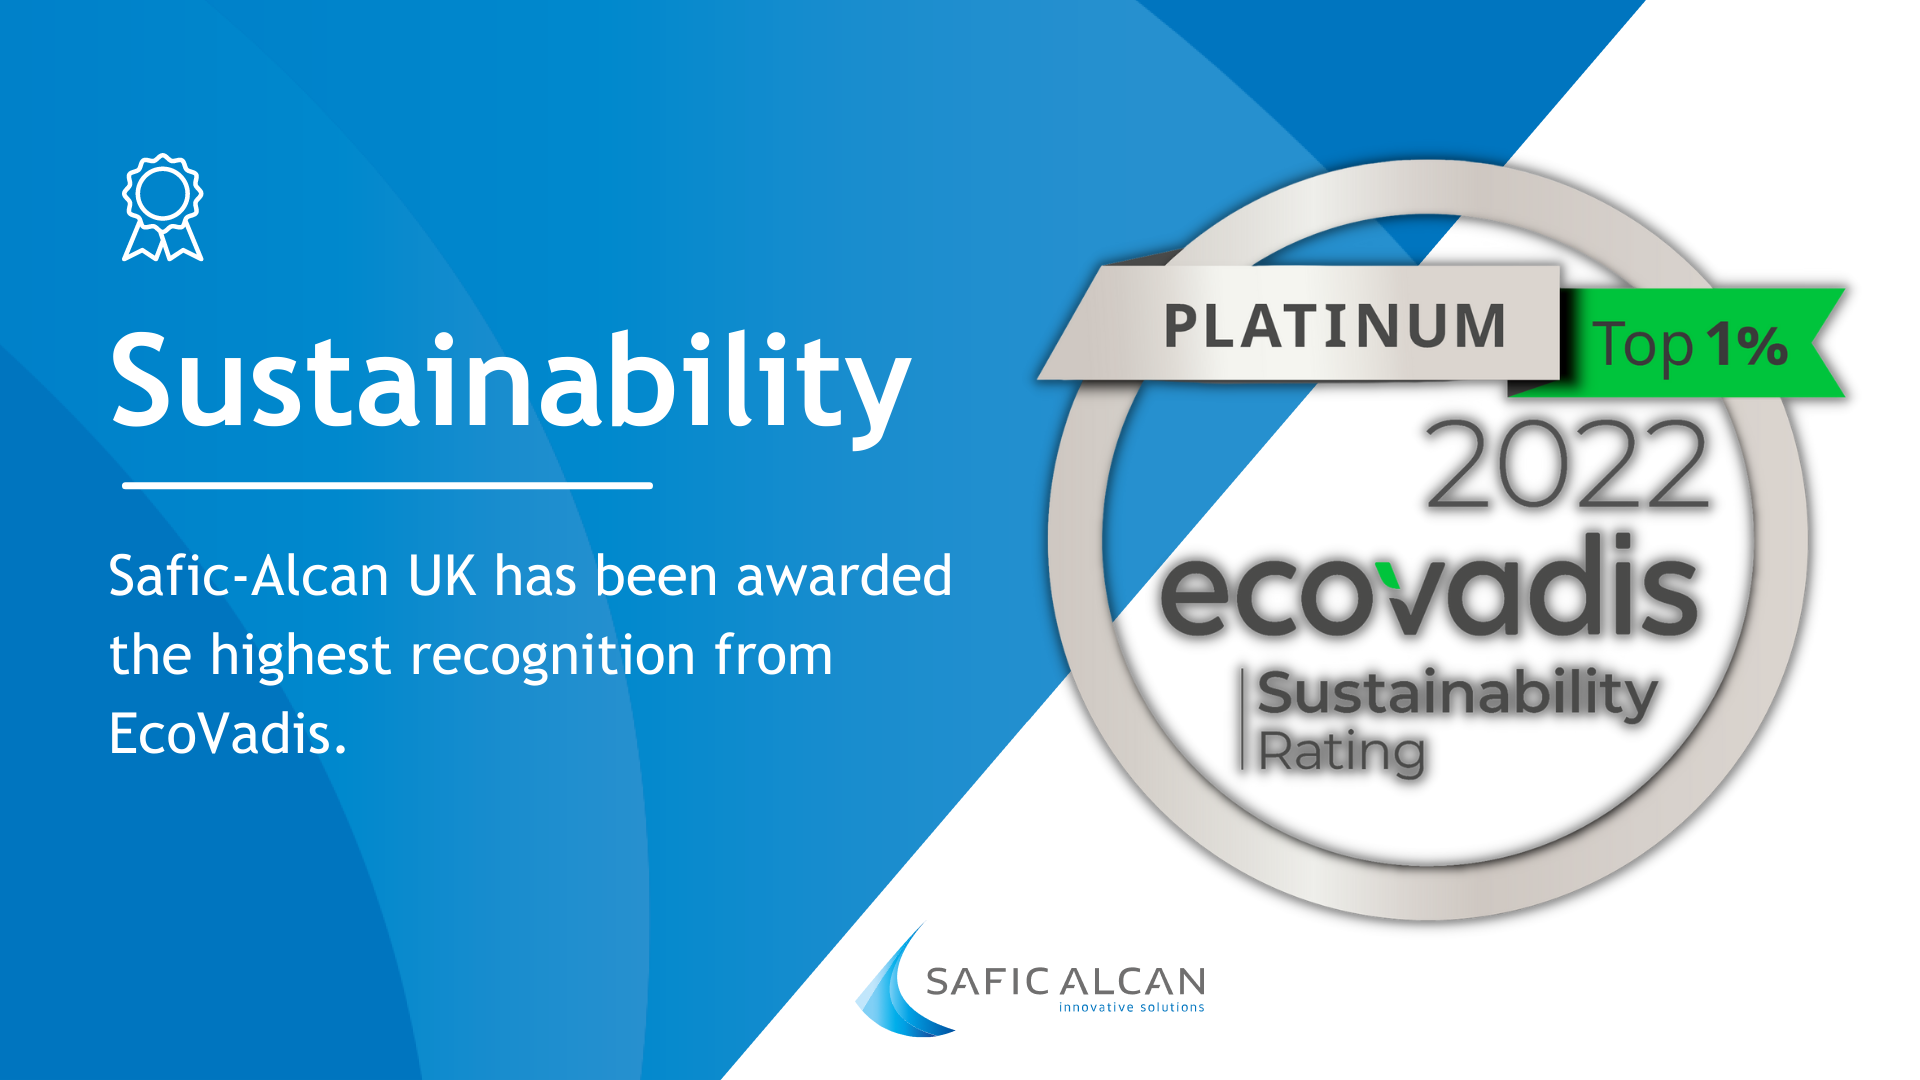 Safic-Alcan UK rewarded with a Platinum Medal from EcoVadis